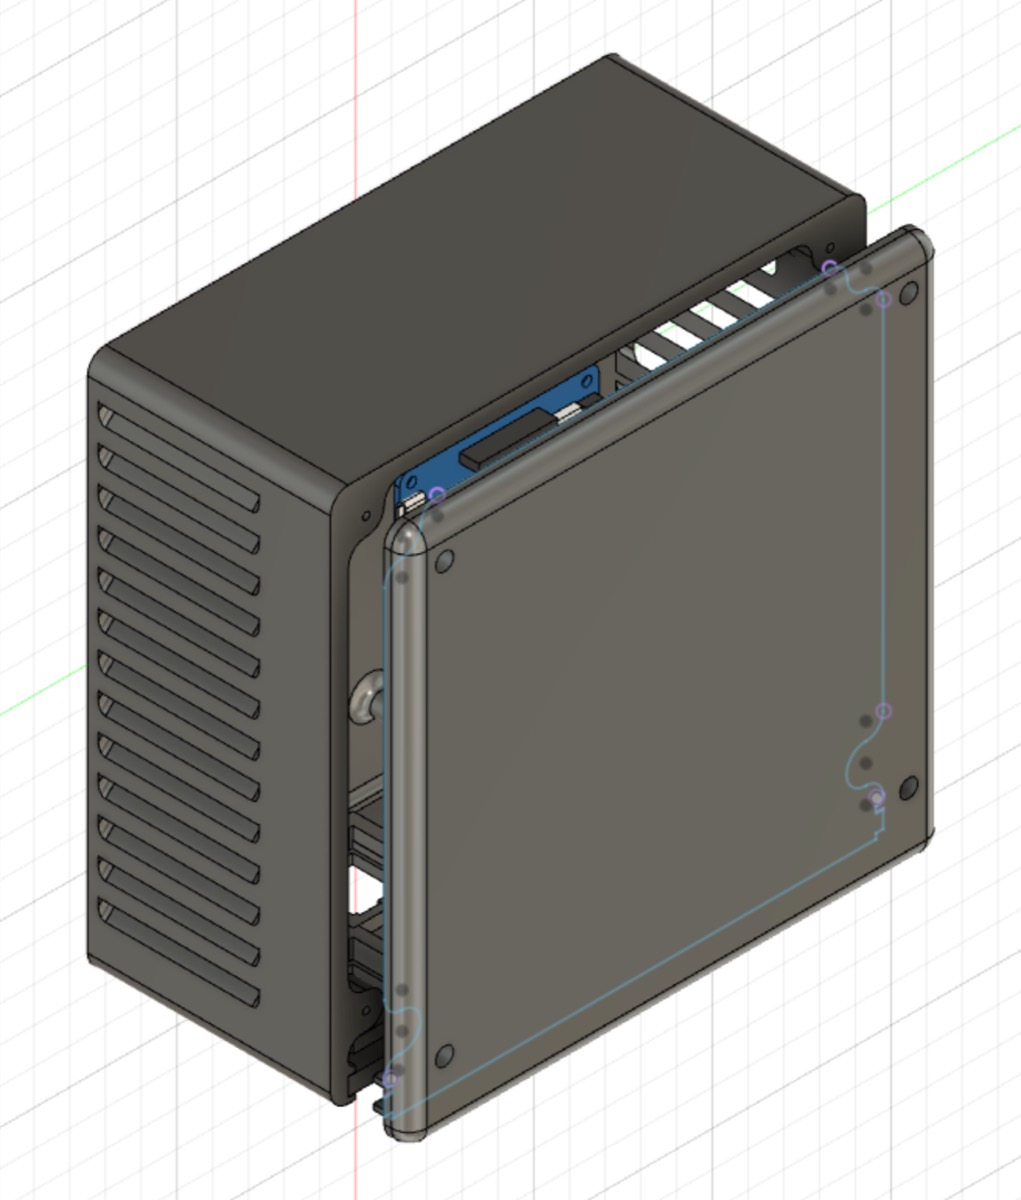 Here is my Pi case in the design phase